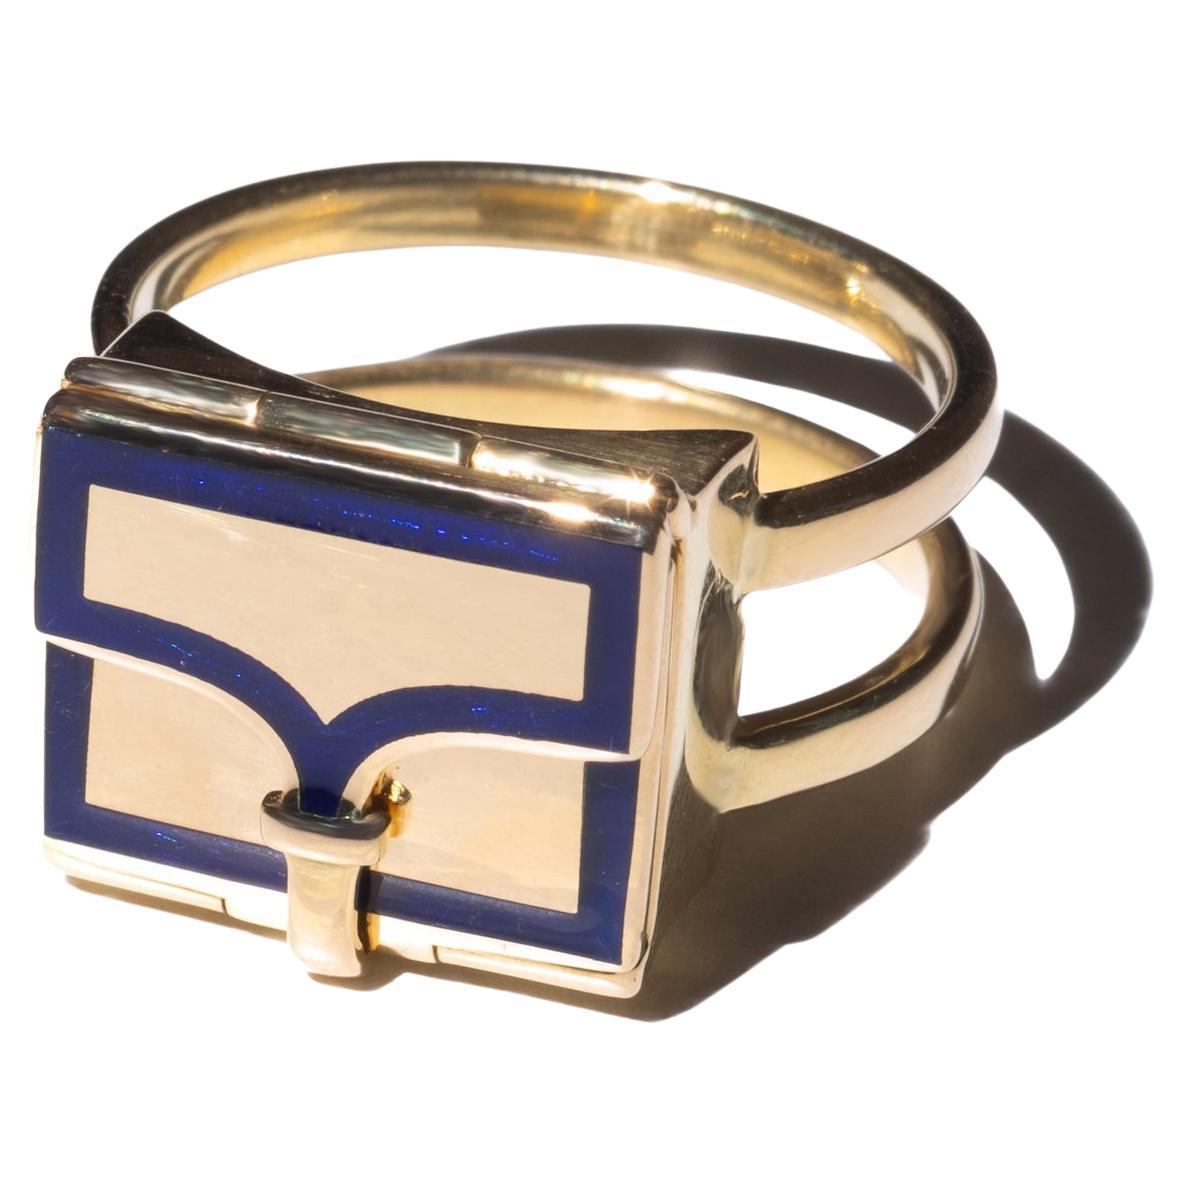 The Fleur Fairfax Book Ring in 18ct Gold and Enamel - Sapphire Blue US 5.75